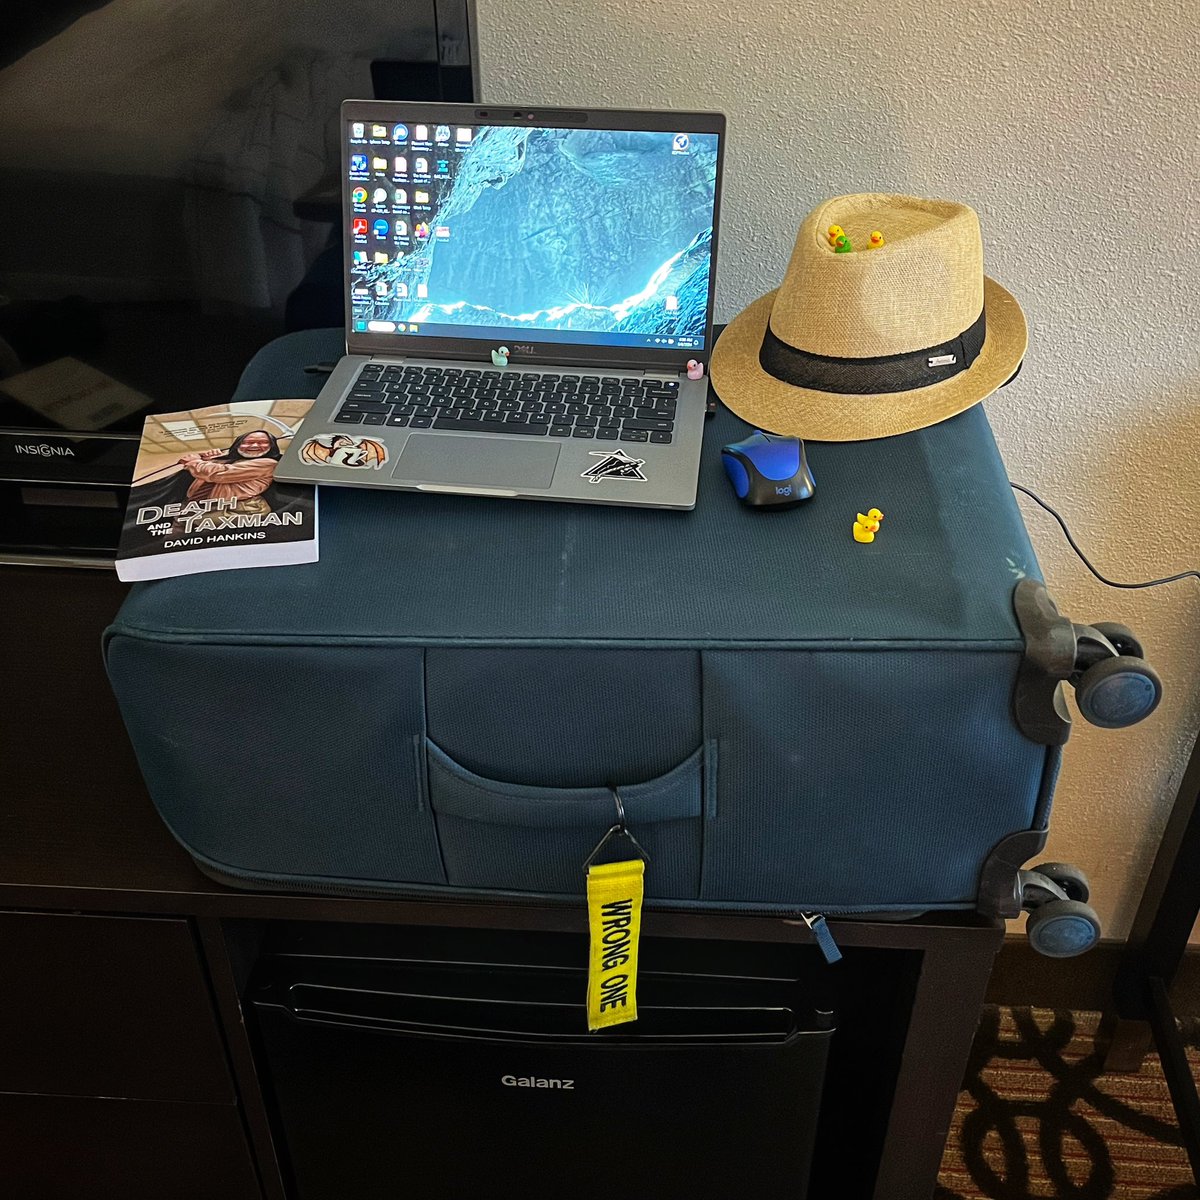 When your hotel desk chair is crap, but you still need to write. Mobile Standing Desk (patent pending).

#writinglife #amwriting #traveltheworld #neverstopexploring #writersofinstagram #deathandthetaxman #lostbardsduckies